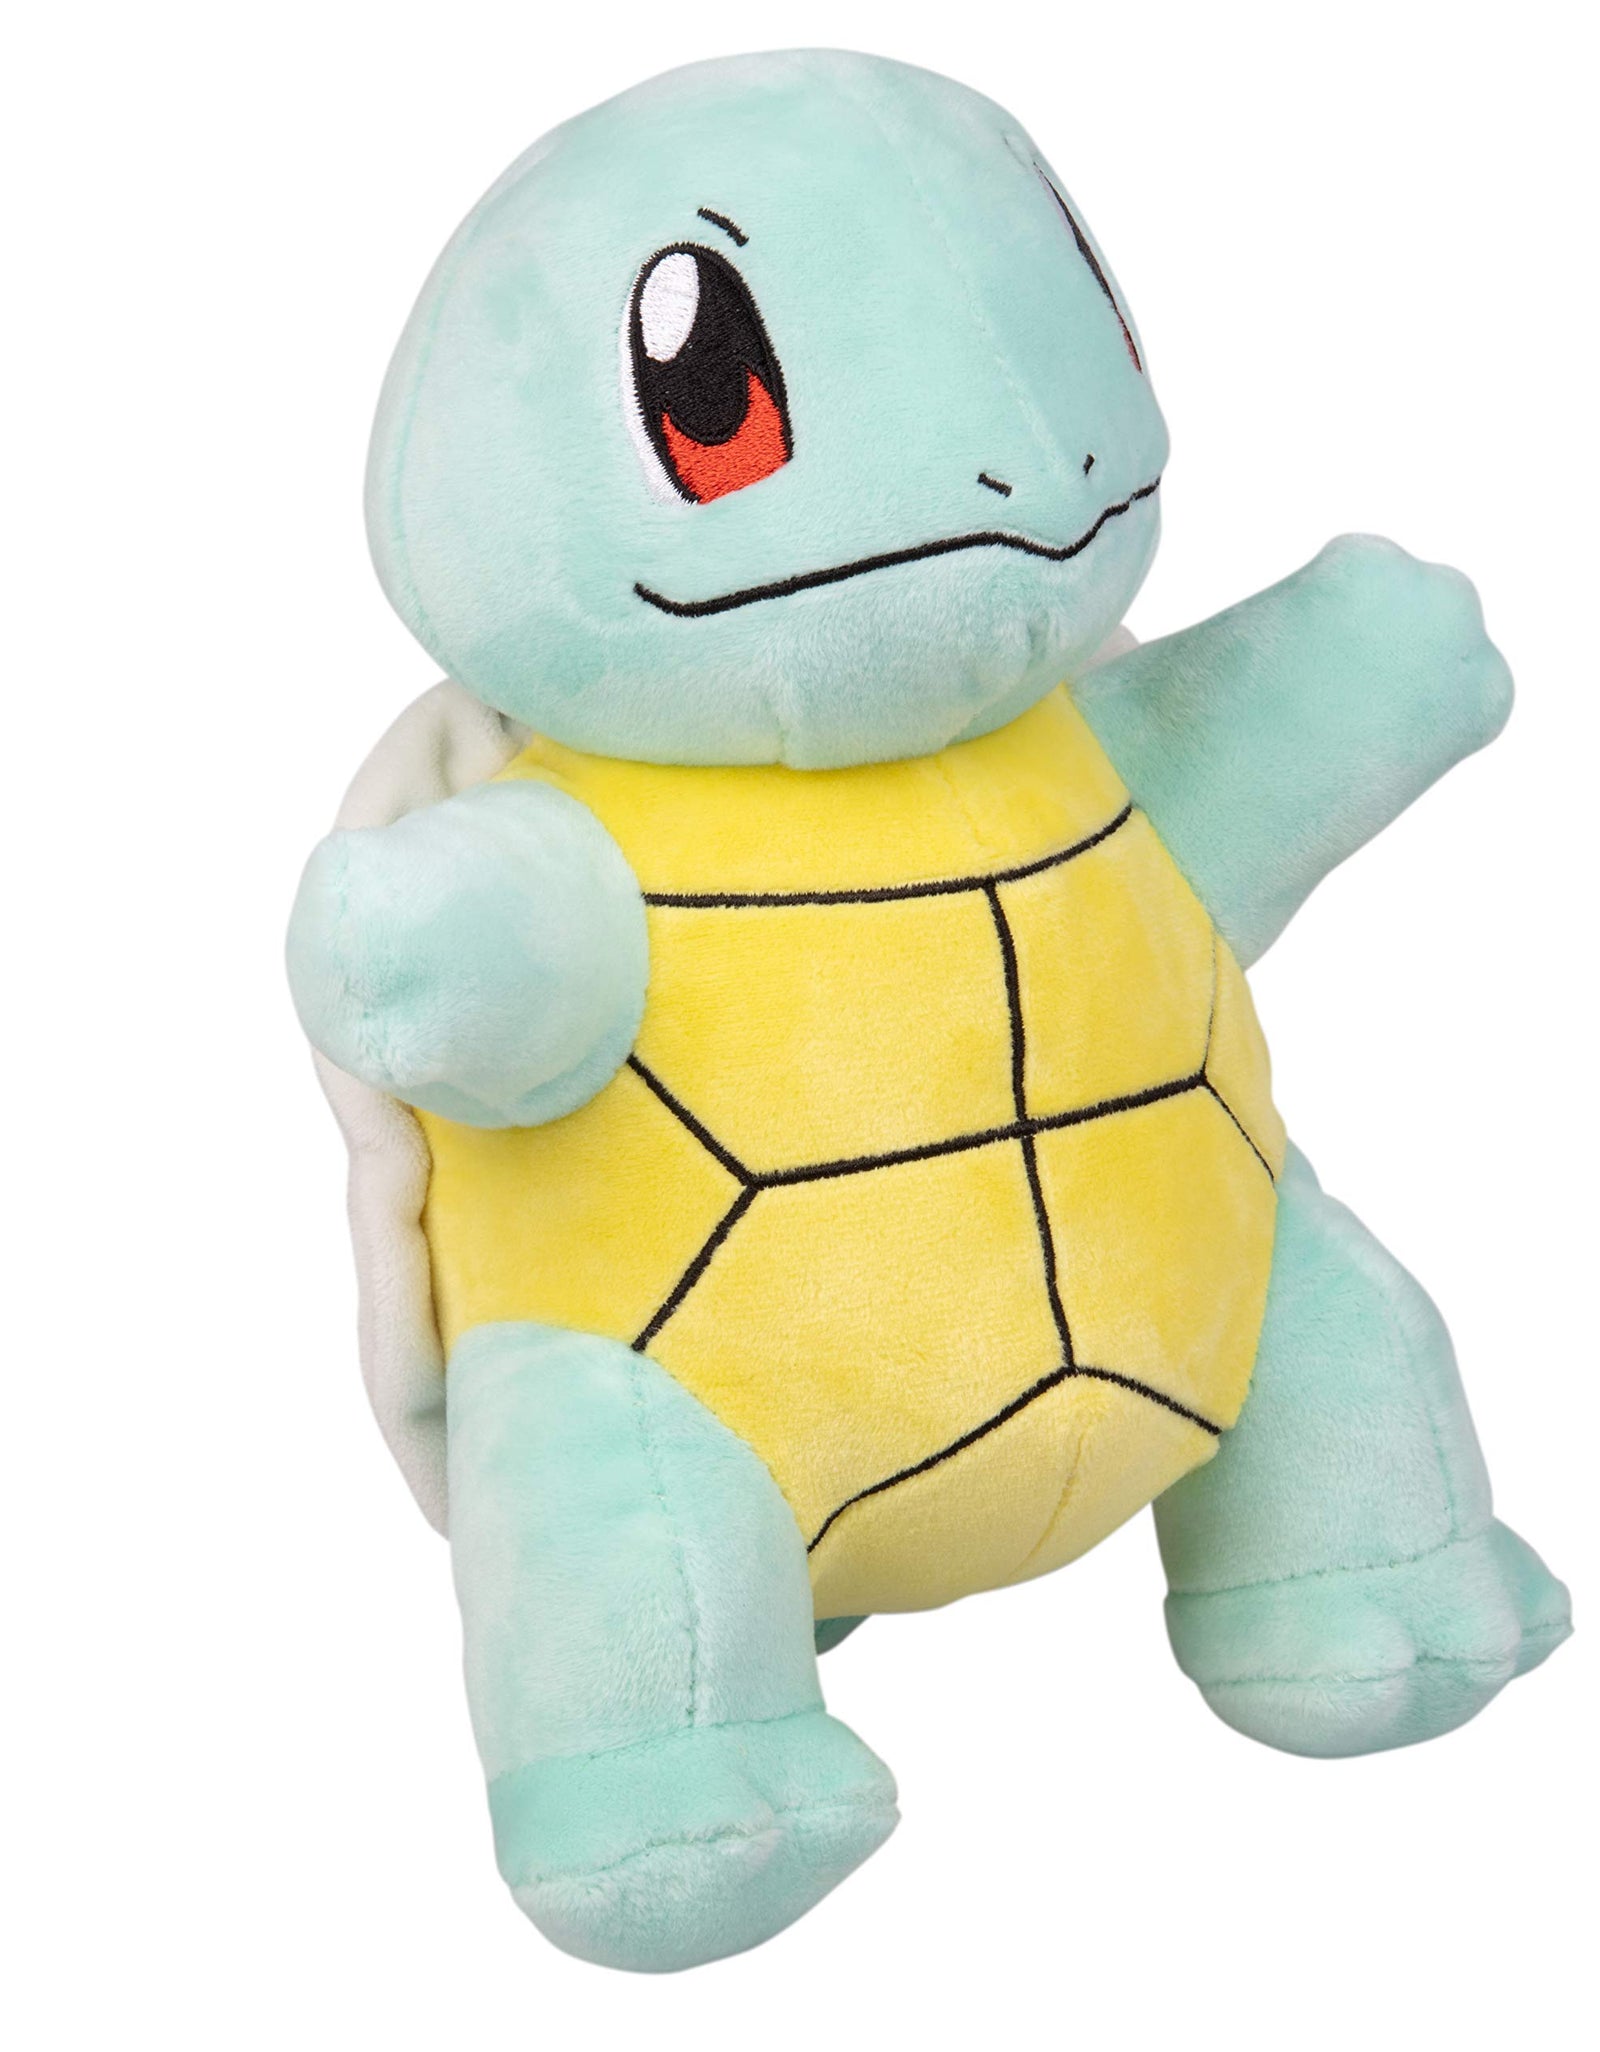 Pokemon Squirtle Plush Stuffed Animal Toy - 8 inches